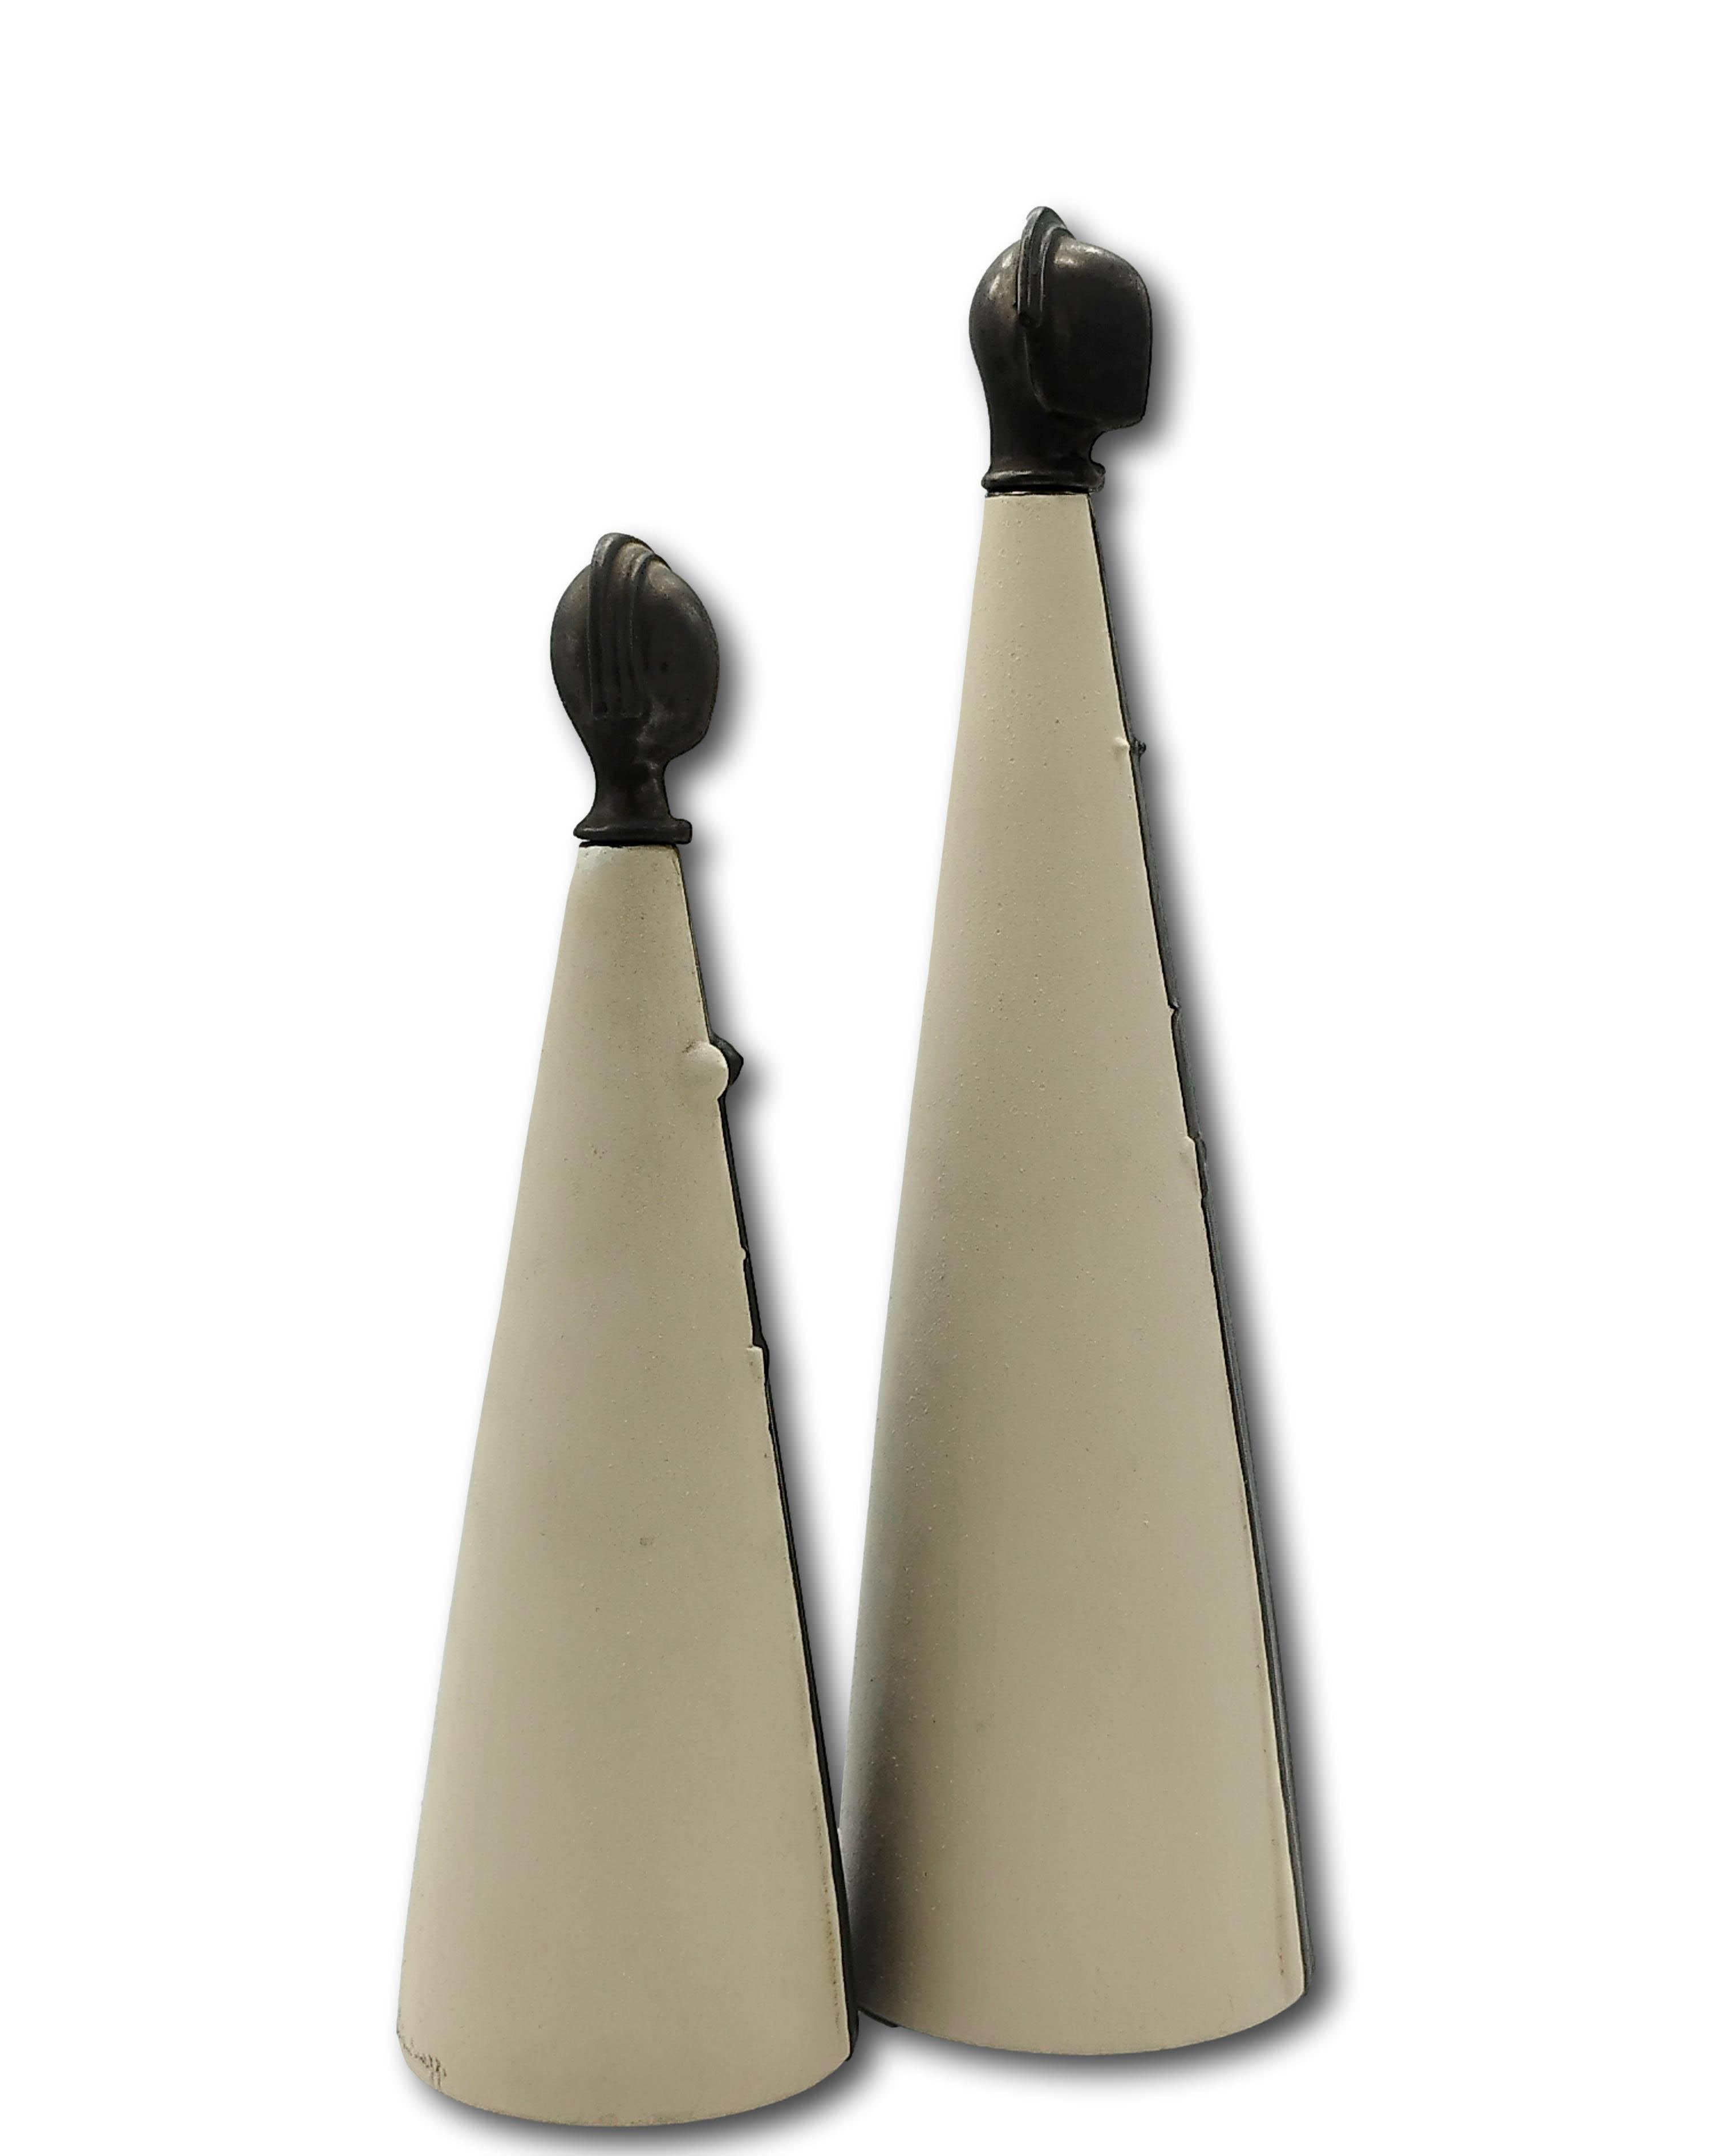 Rare pair of two-tone black and white ceramic bottles/sculptures with Lei & Lui metal caps, signed Chiminazzo.
Woman size cm. h.30x20x20